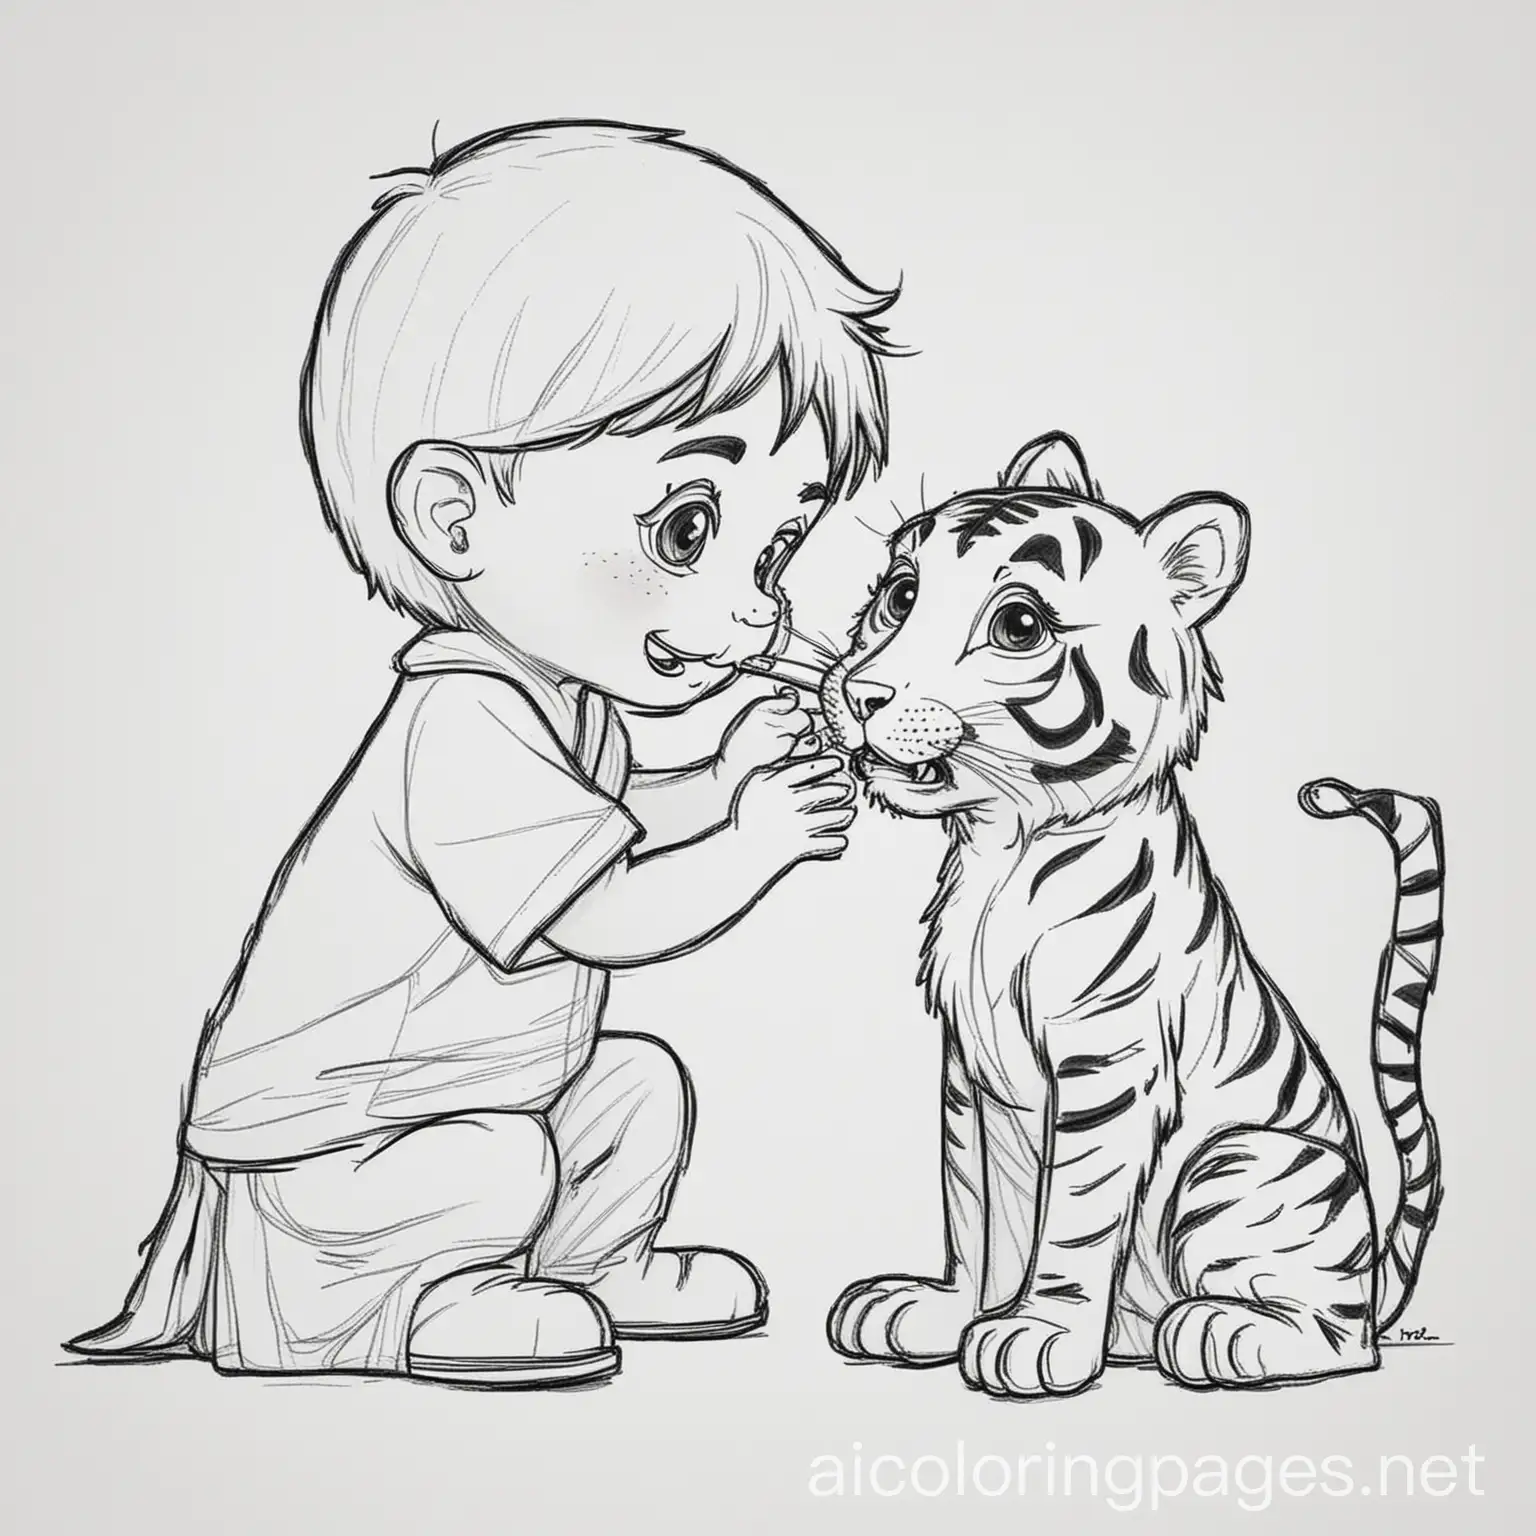 Boy-Feeding-Baby-Tiger-Coloring-Page-Black-and-White-Line-Art-for-Easy-Coloring